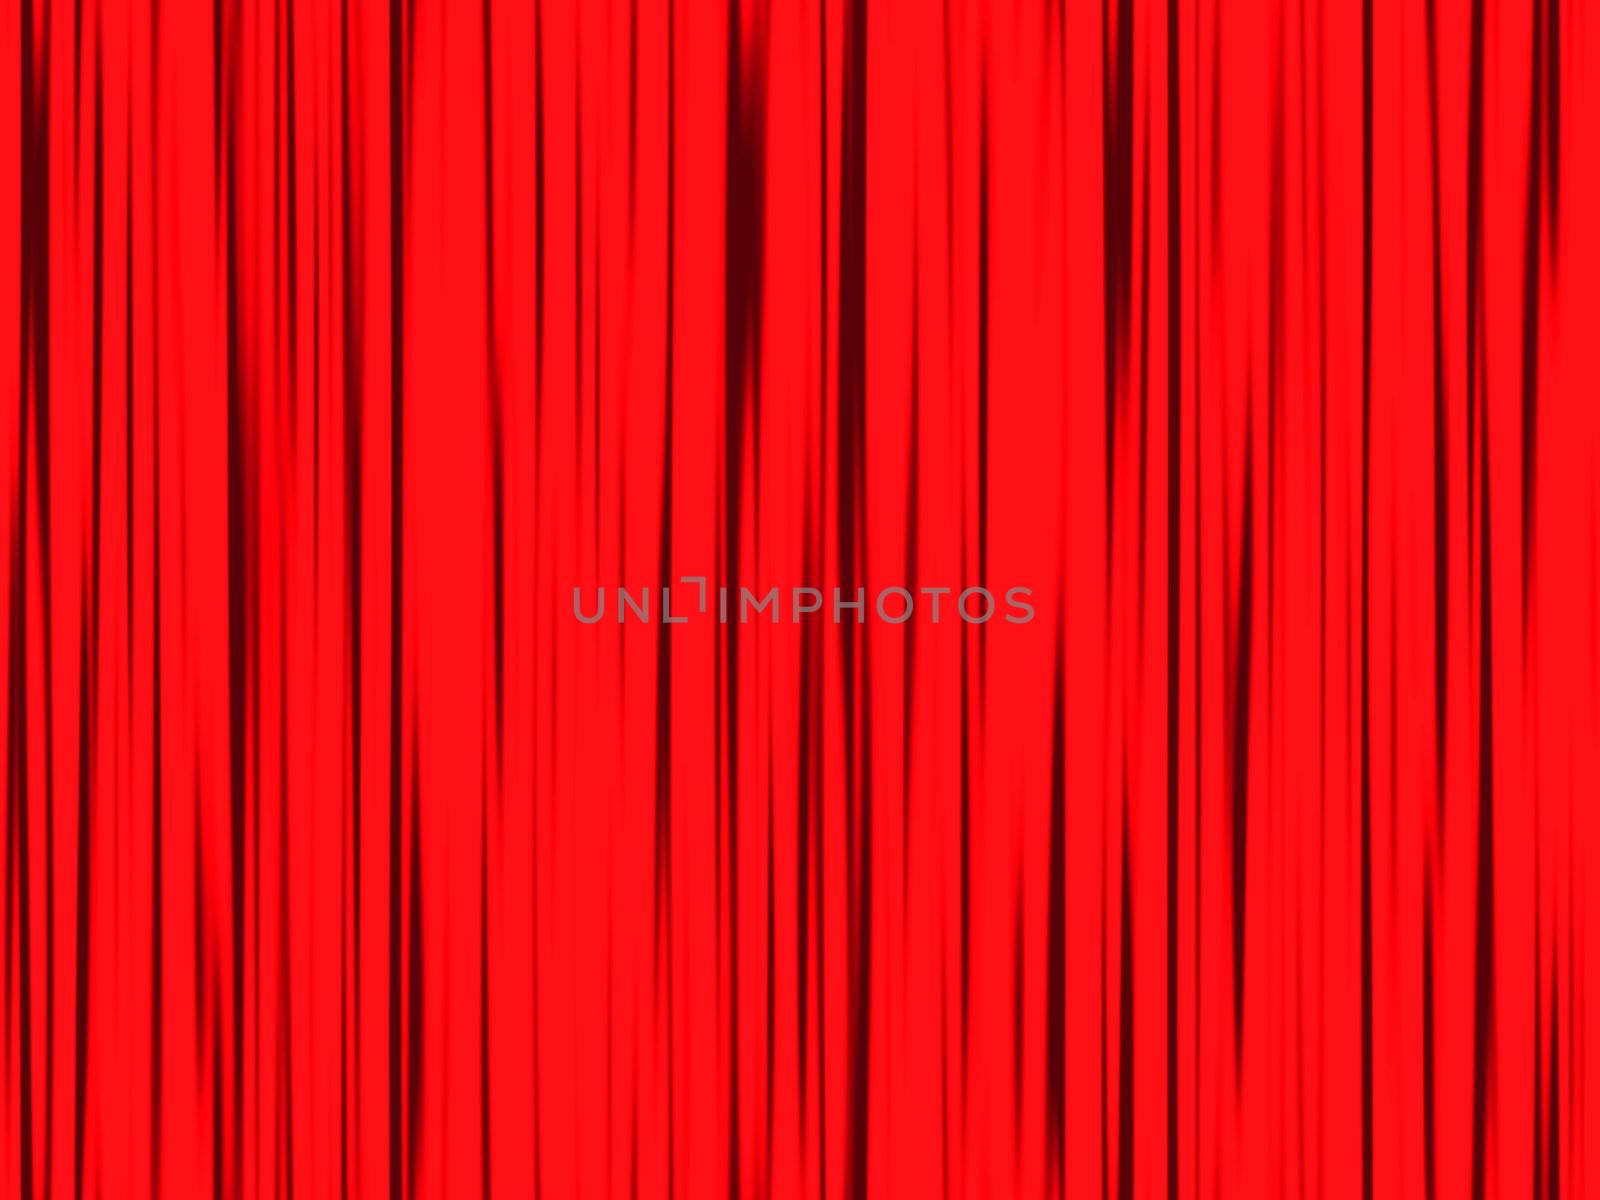 abstract curtains backdrop - the slight out of focus effect is deliberate to emphasise the image's use as a backdrop